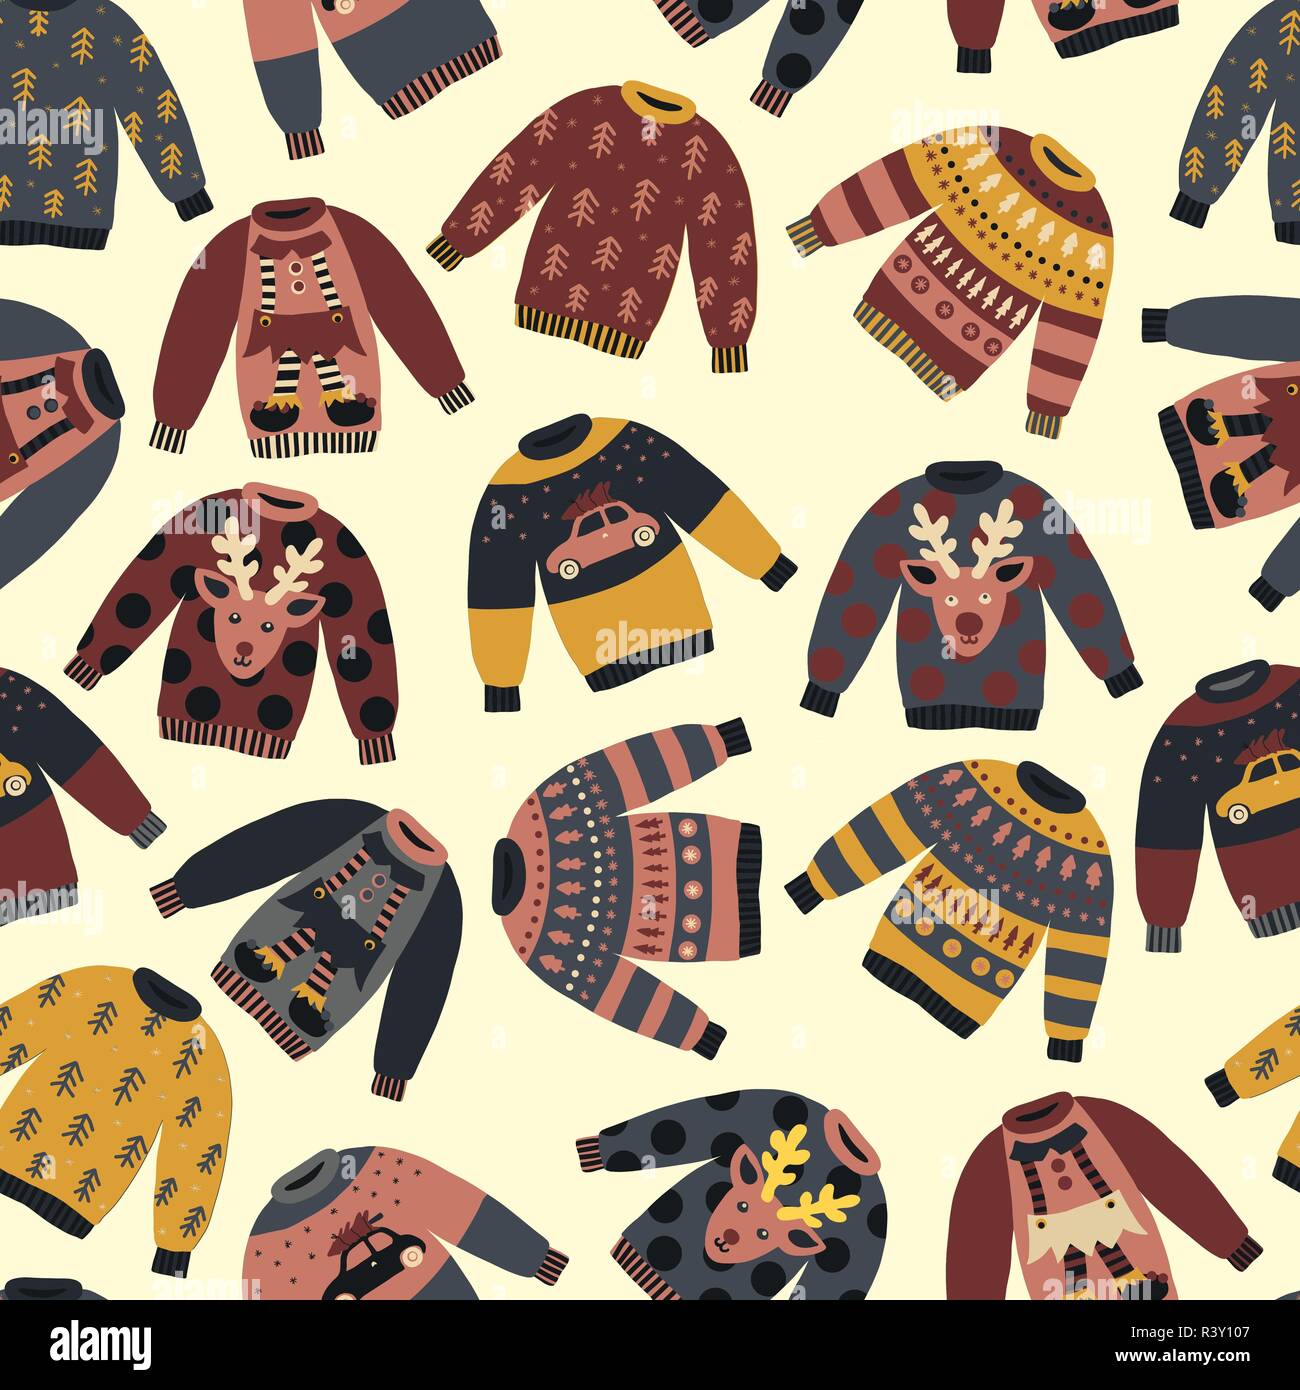 Christmas Holiday sweaters seamless vector pattern. Knitted ugly winter jumpers with norwegian ornaments and decorations. Vintage Christmas background Stock Vector